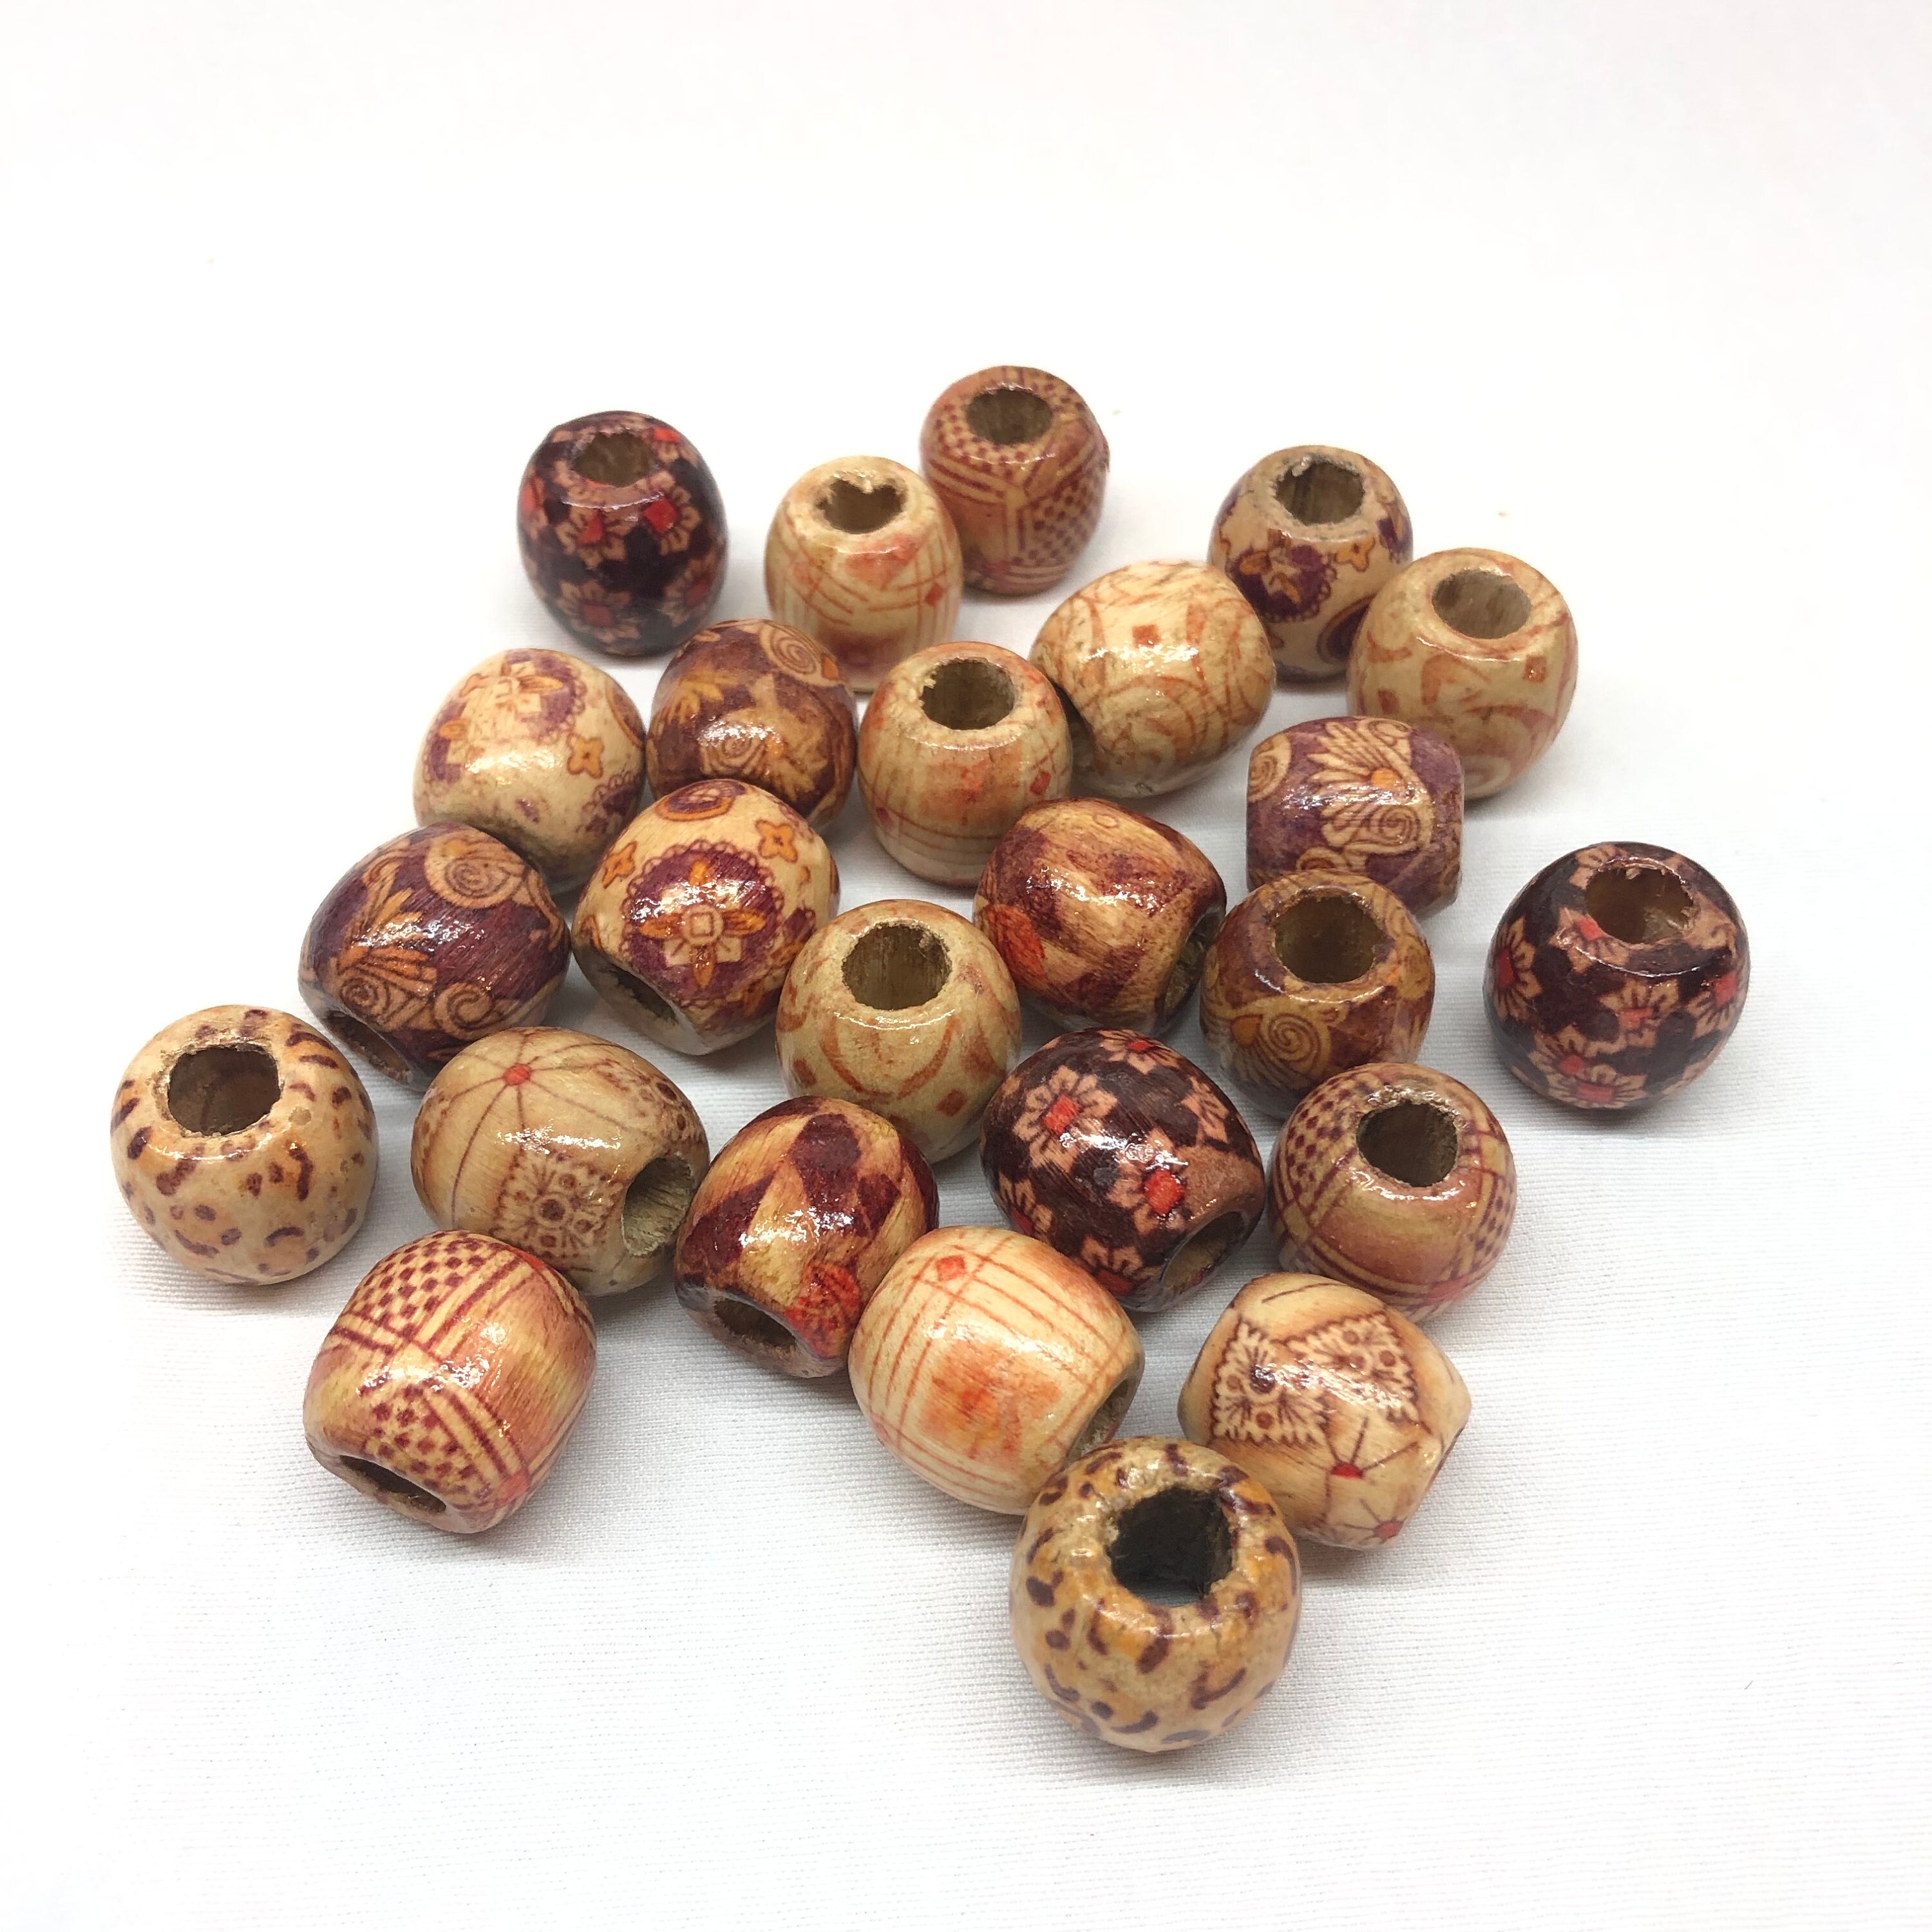 1000 Pcs Wooden Beads Natural Unfinished Wood Beads for Crafts, 7 Sizes  Beads for Jewelry Making, Garland, Home/Farmhouse Decor and DIY - 6mm, 8mm,  10